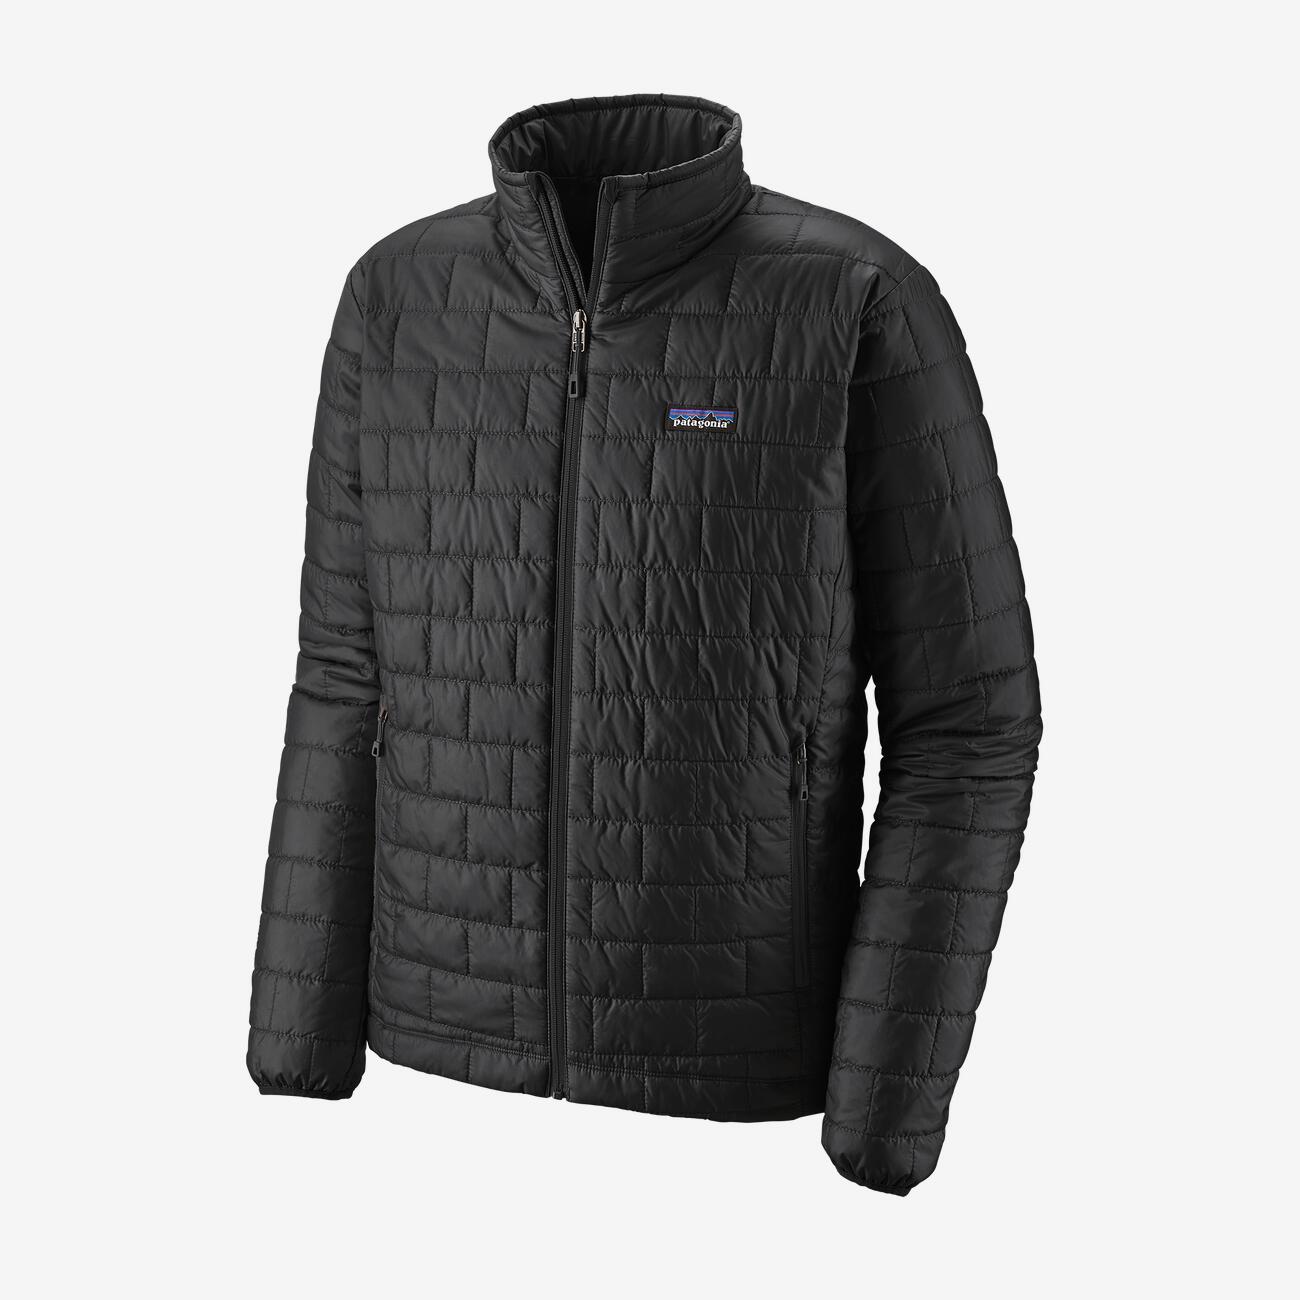 Patagonia Men's Nano Puff Jacket-MENS CLOTHING-Black-S-Kevin's Fine Outdoor Gear & Apparel